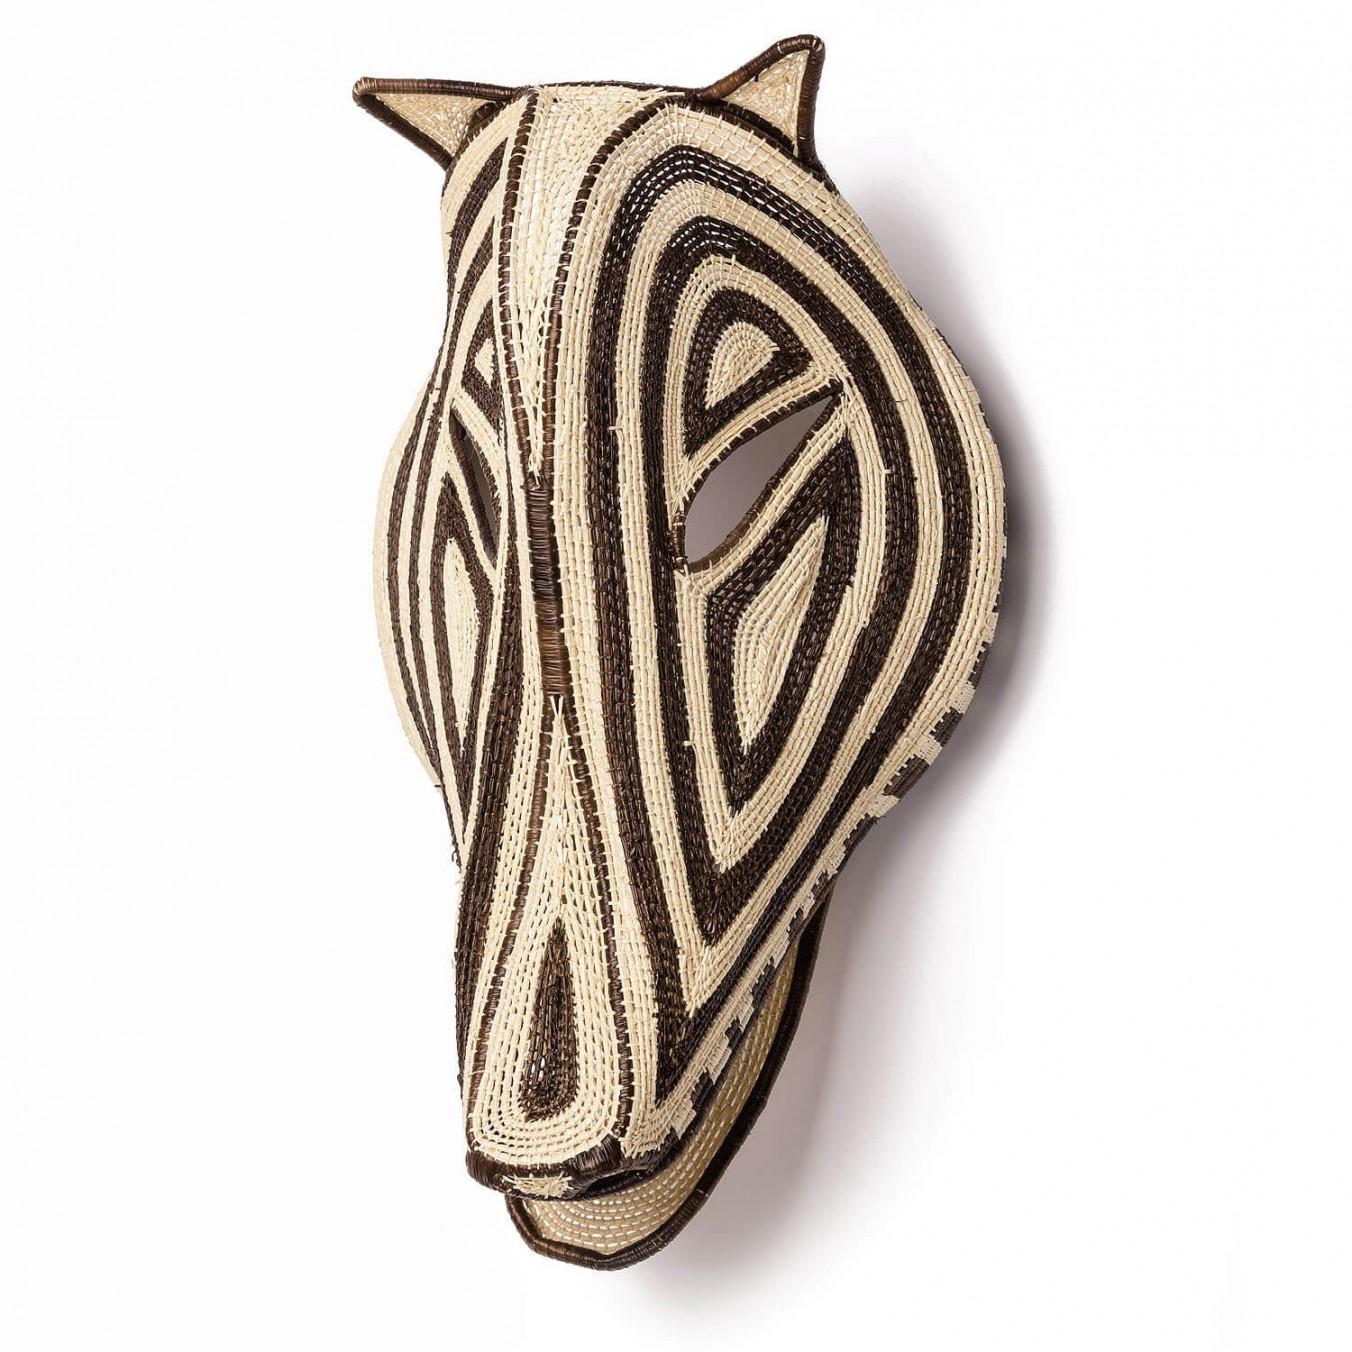 Decorative hand-woven mask from Panama, Nemboro by Ethic&Tropic

Extraordinary art and decorative items, these masks come from the shamanic beliefs and rituals of indigenous Embera tribes of Panama. Through the shamans, Embera people get in contact